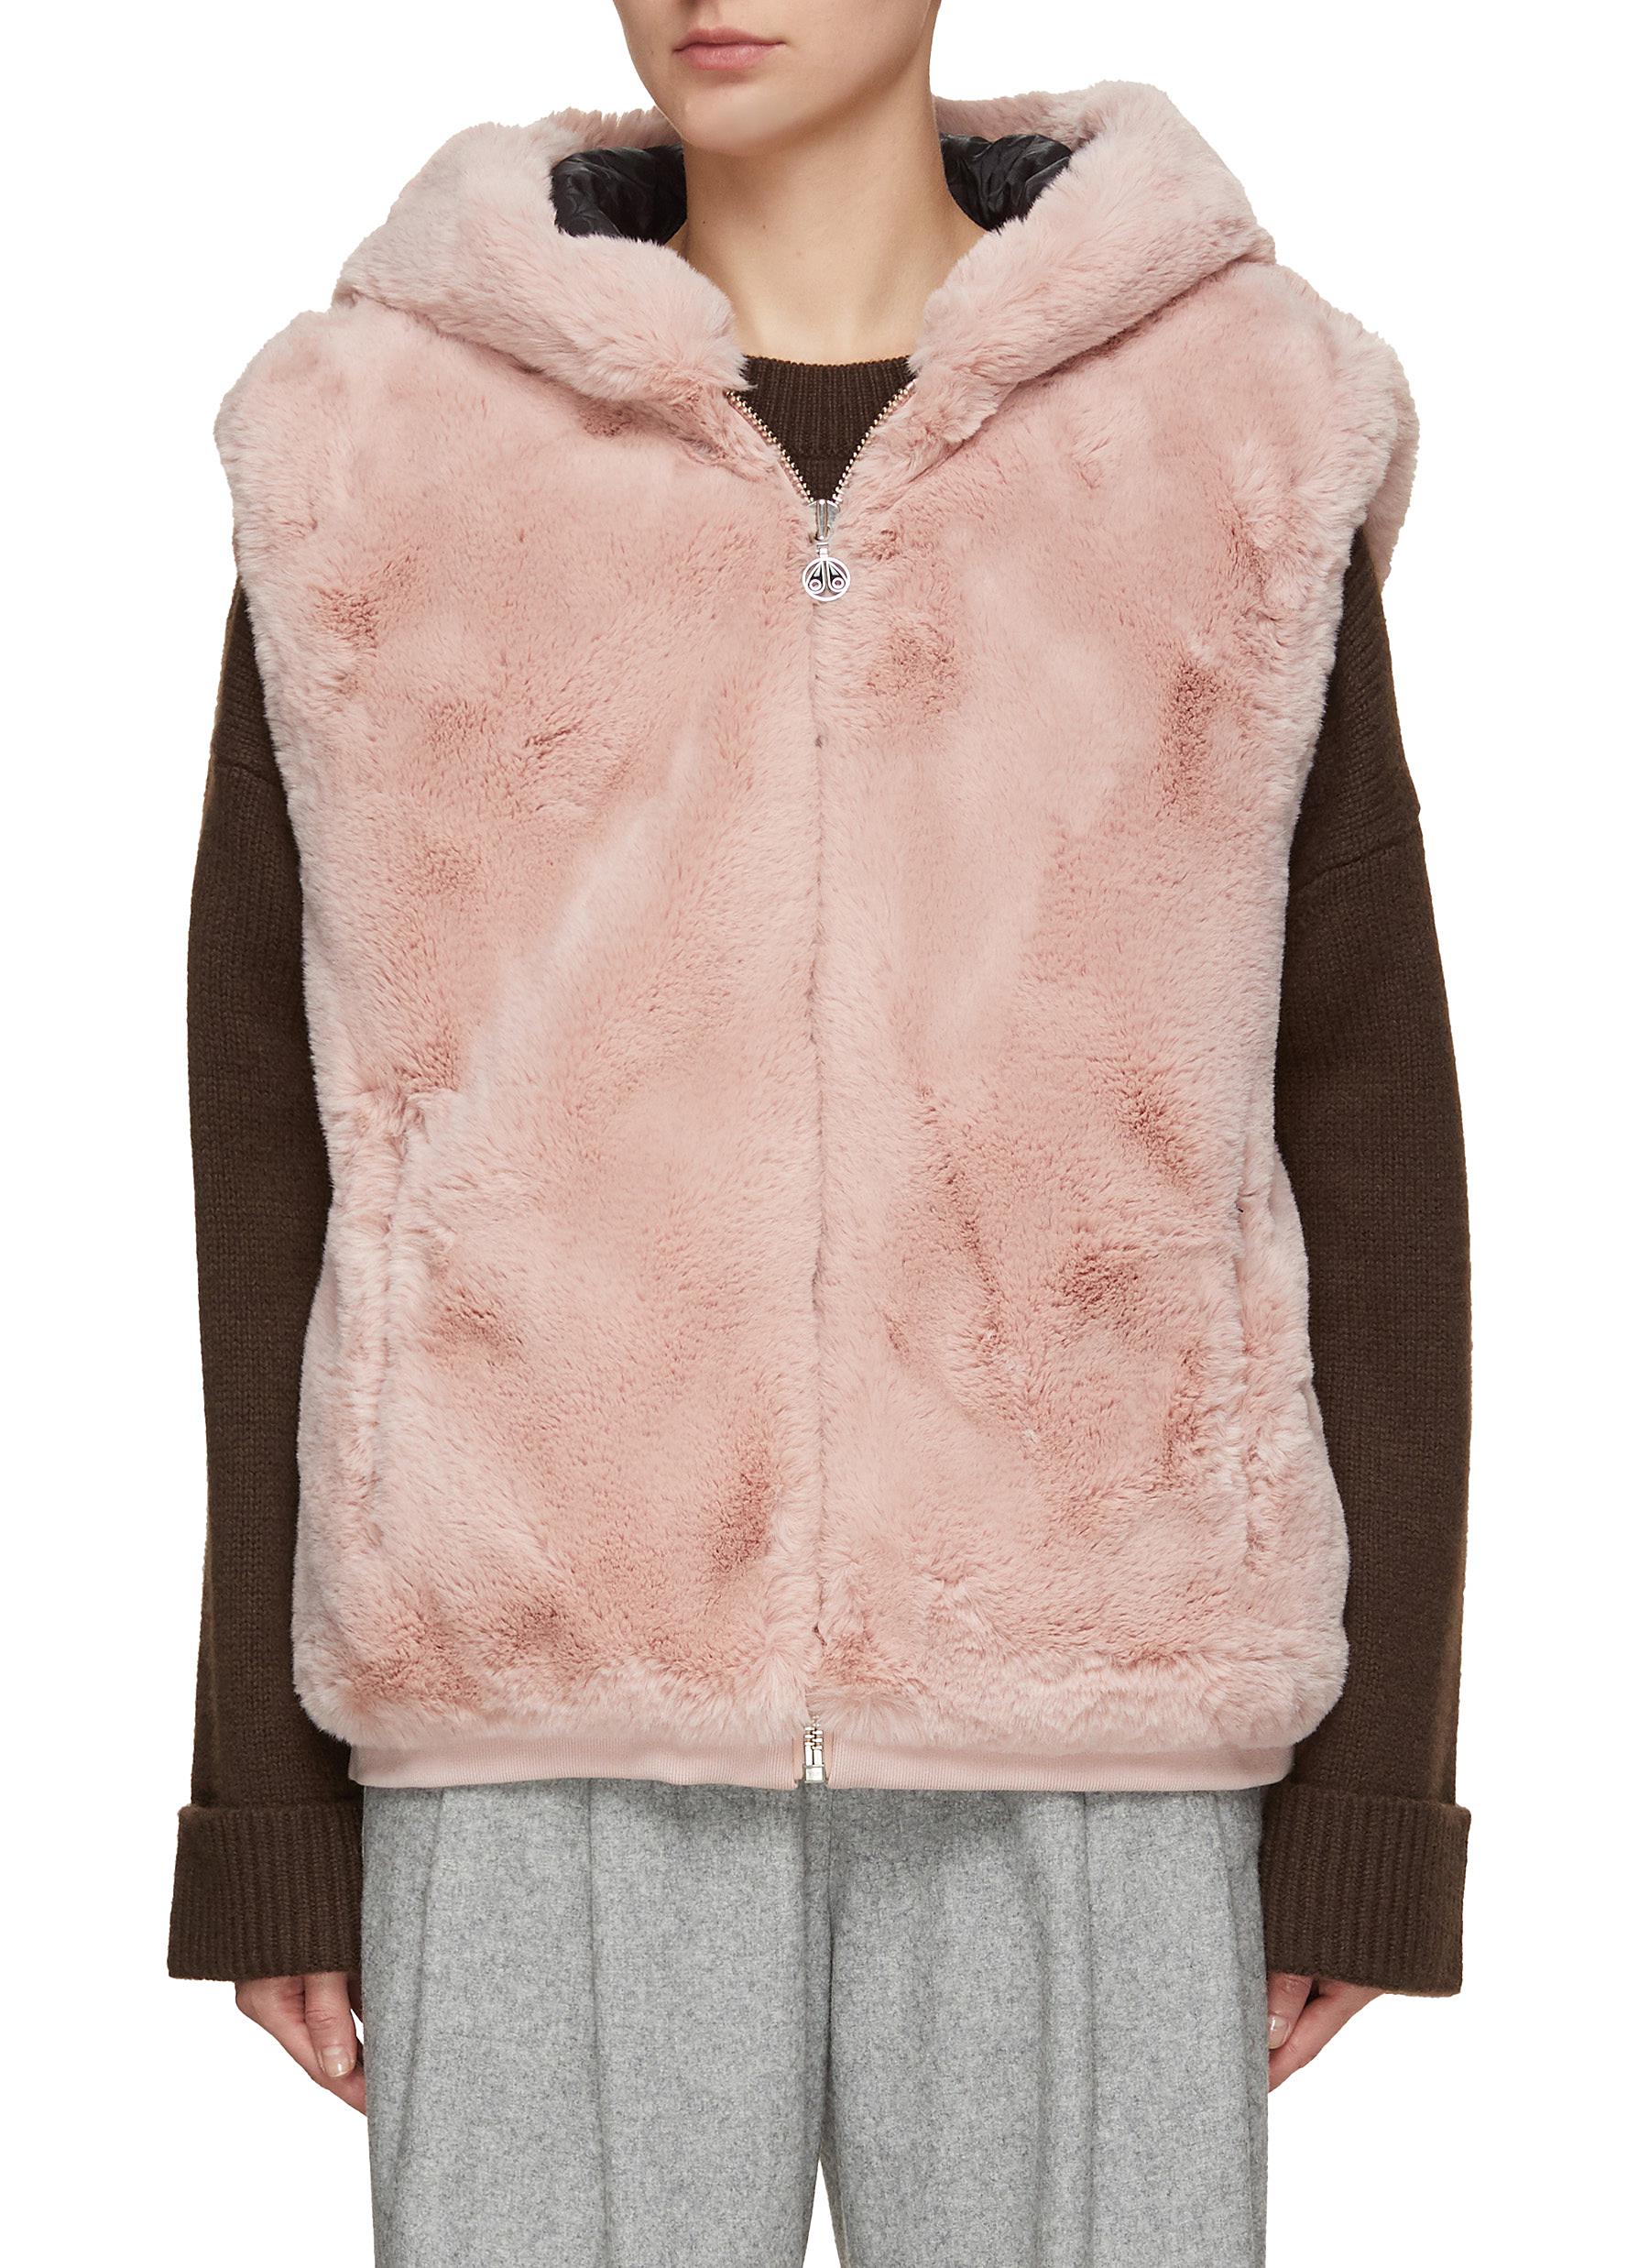 State Bunny Hooded Faux Fur Vest